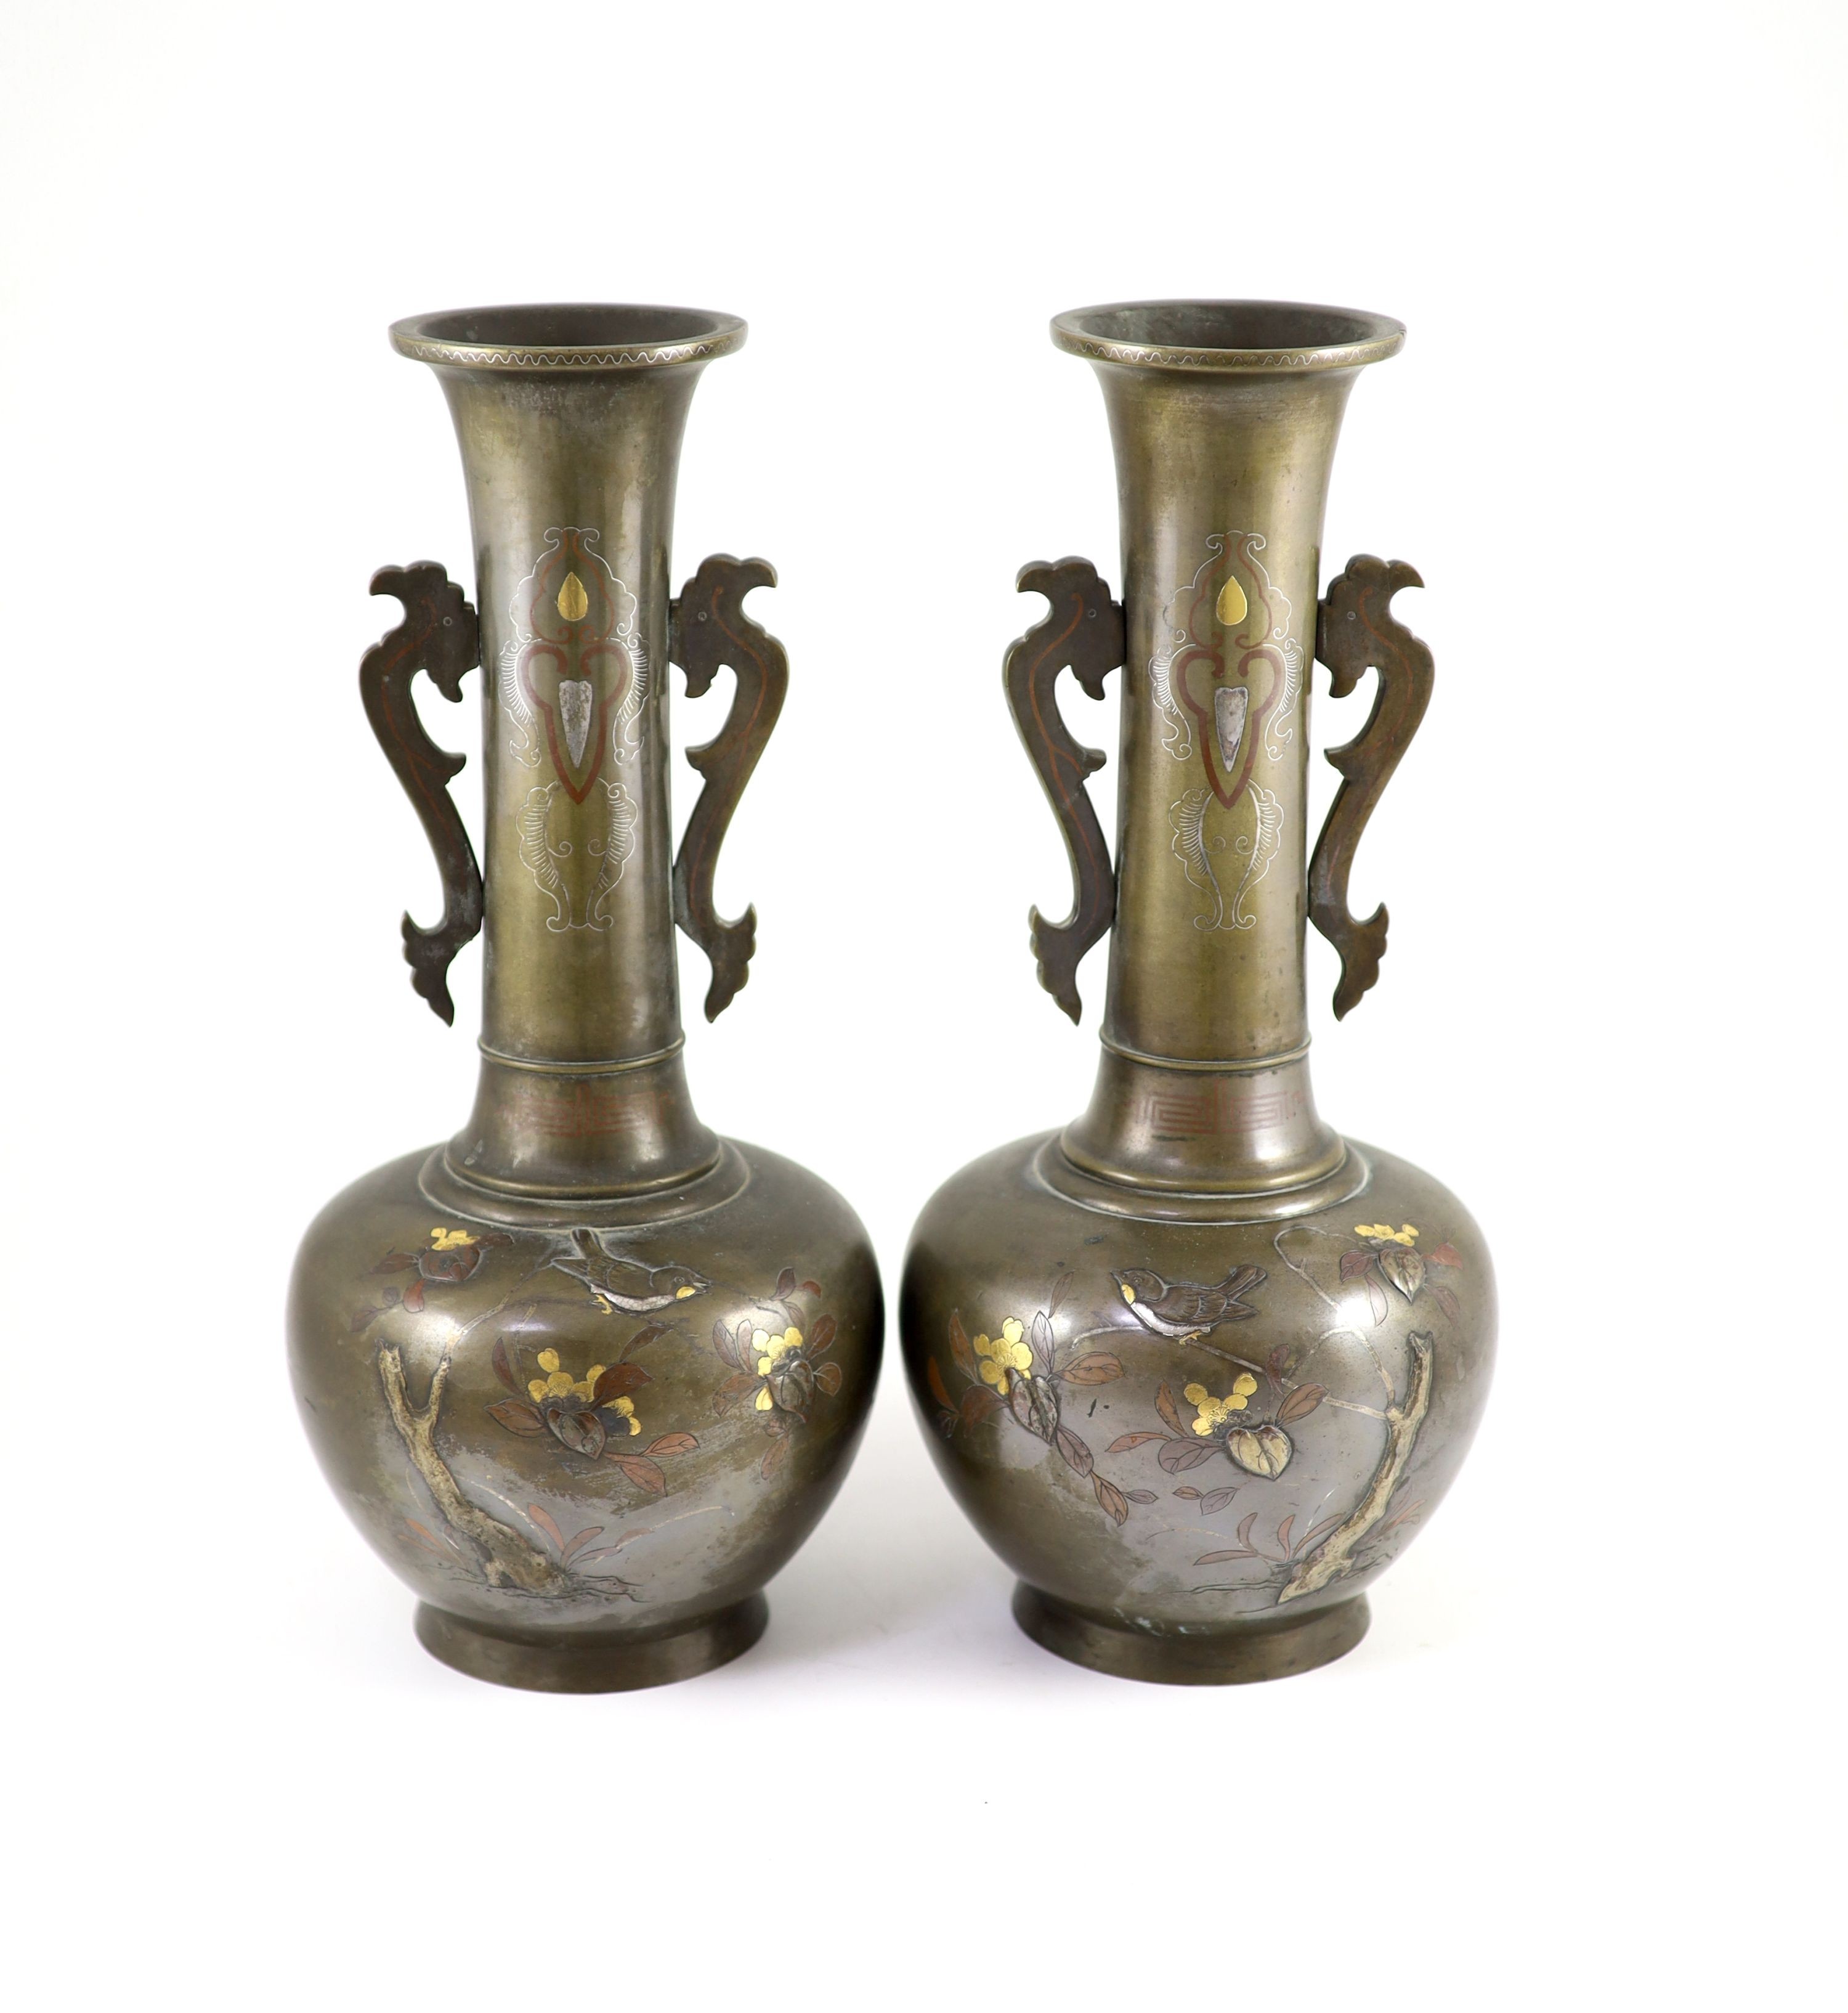 A pair of Japanese bronze and mixed metal bottle vases, Meiji period, 36cm high, patchy patina